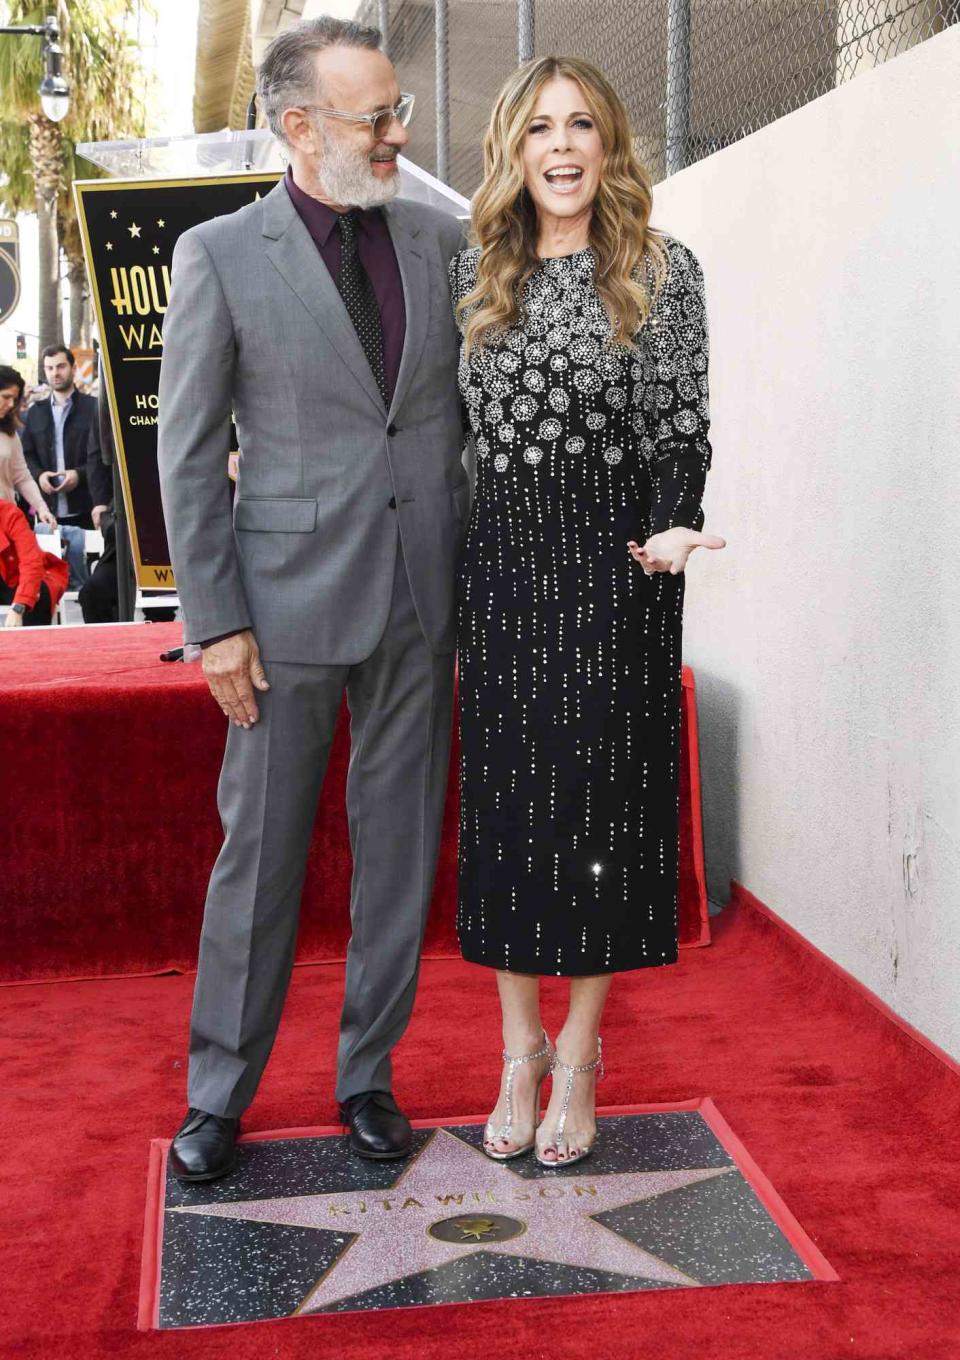 Tom Hanks and wife Rita Wilson stand with her newly unveiled star after she was honored on the Hollywood Walk of Fame in Hollywood,, California on March 29, 2019